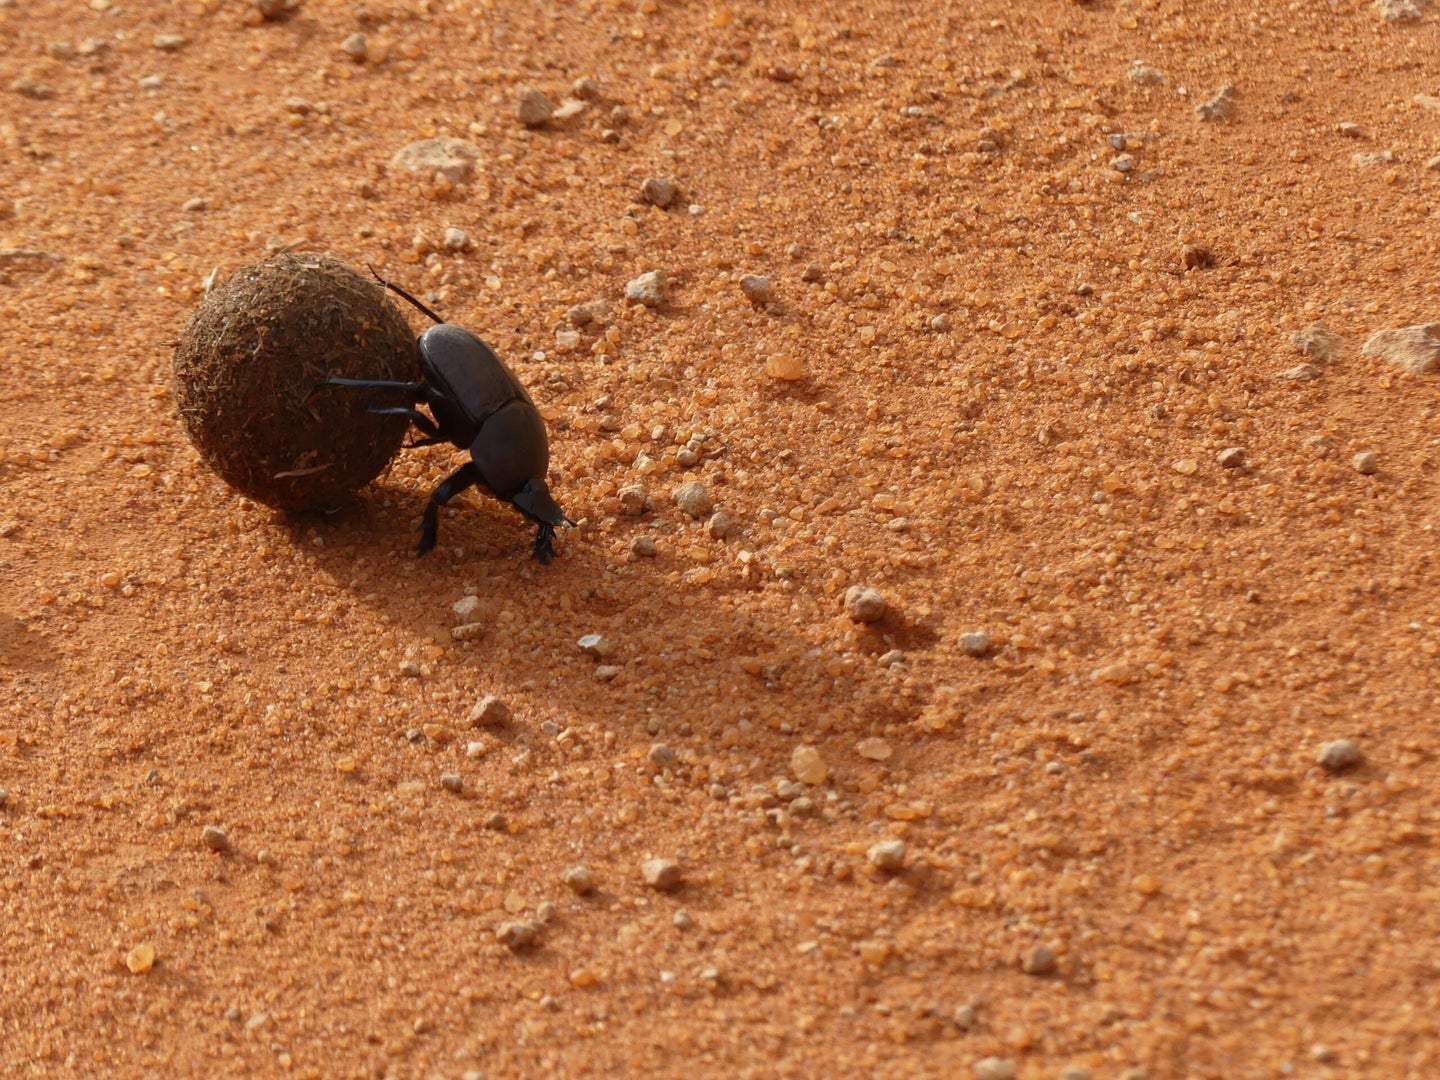 Dung beetle rolling manure.